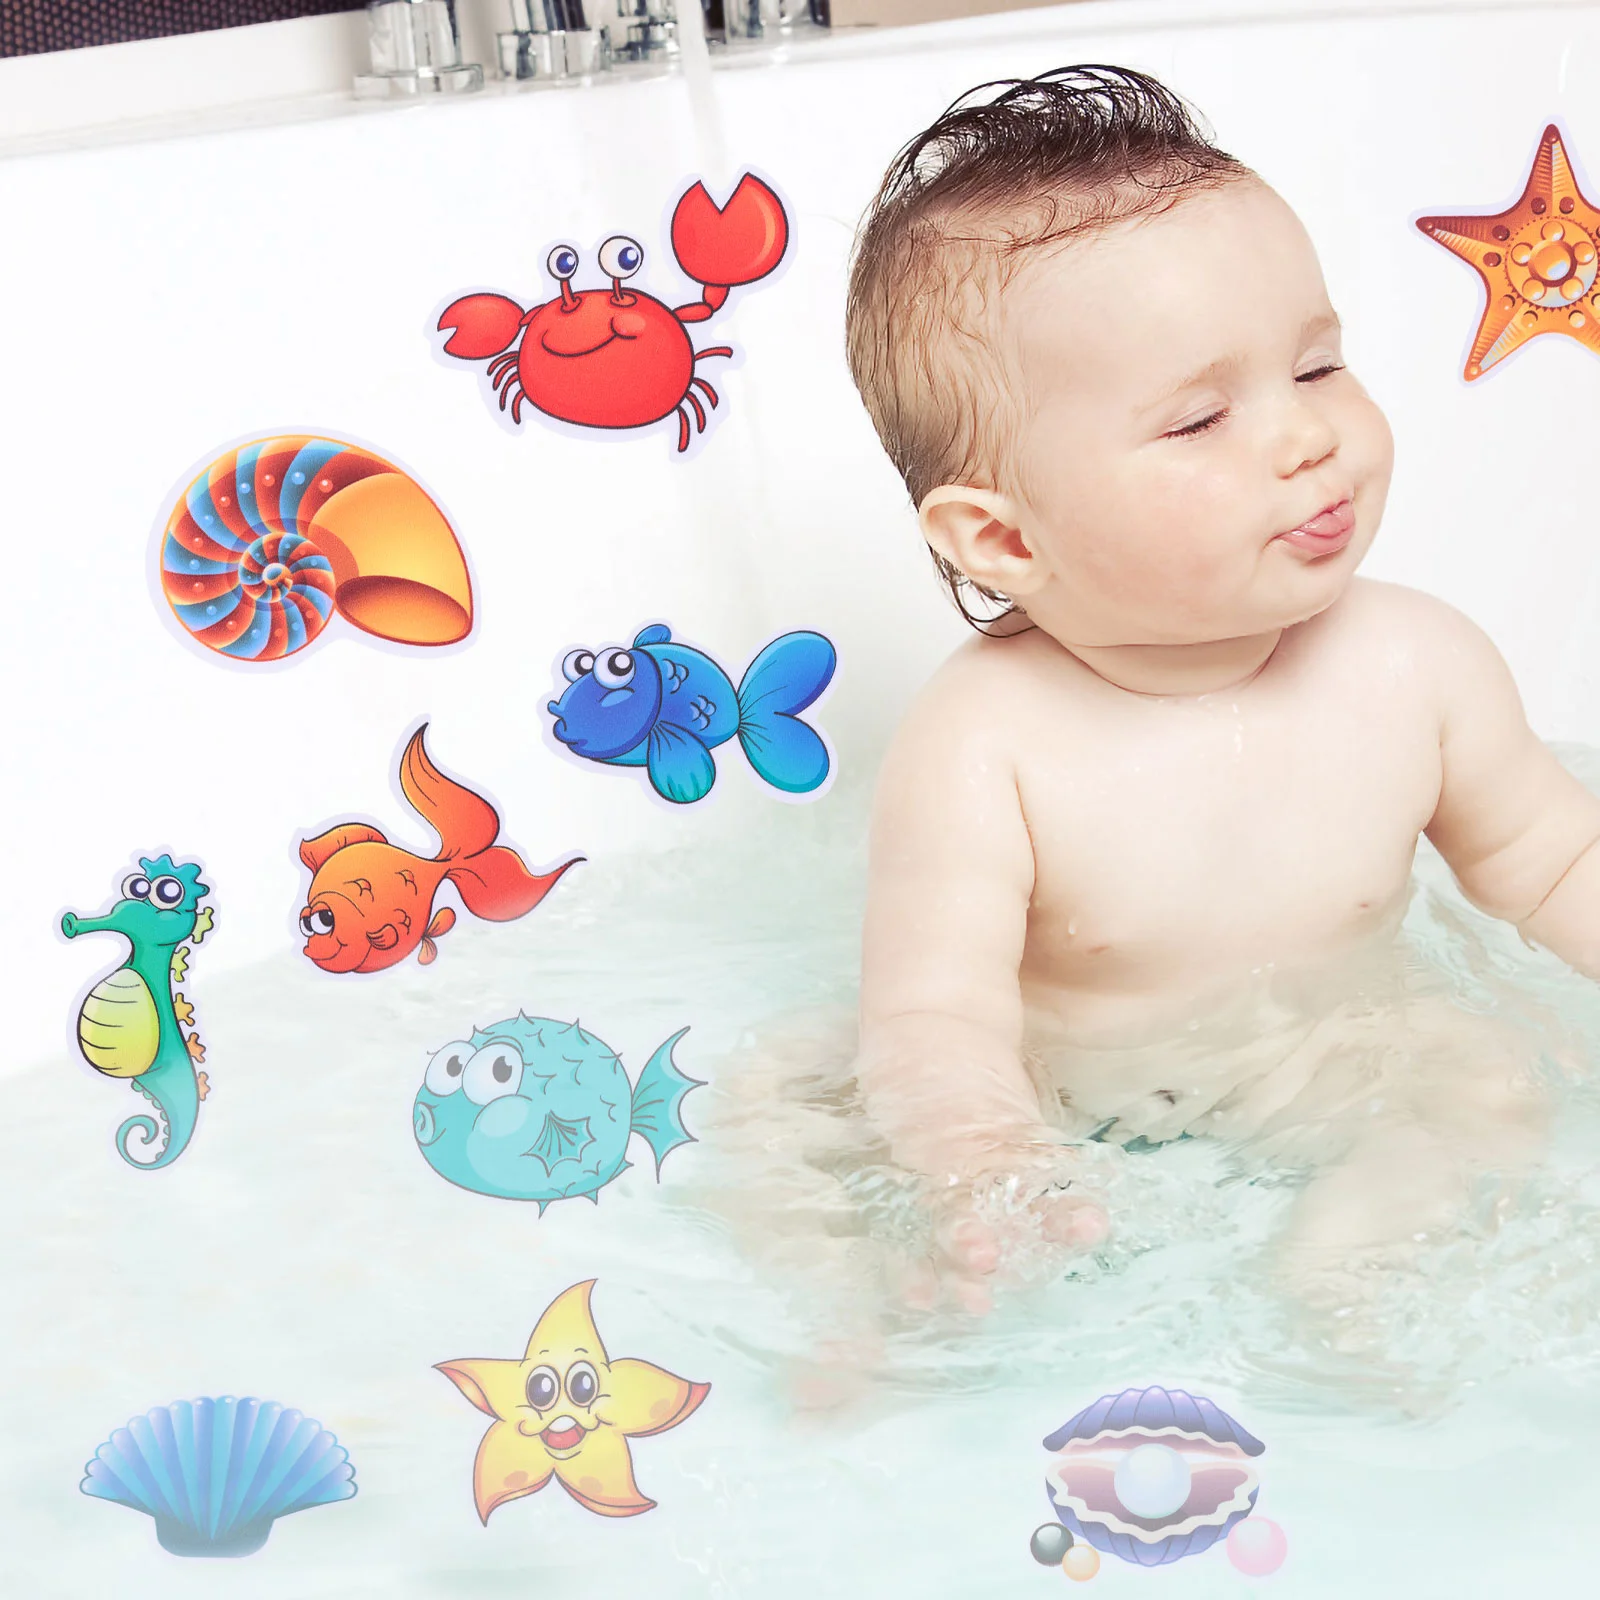 

10Pcs Bathtub Stickers Adorable Sea Animal Pattern Adhesive Stickers for Kids